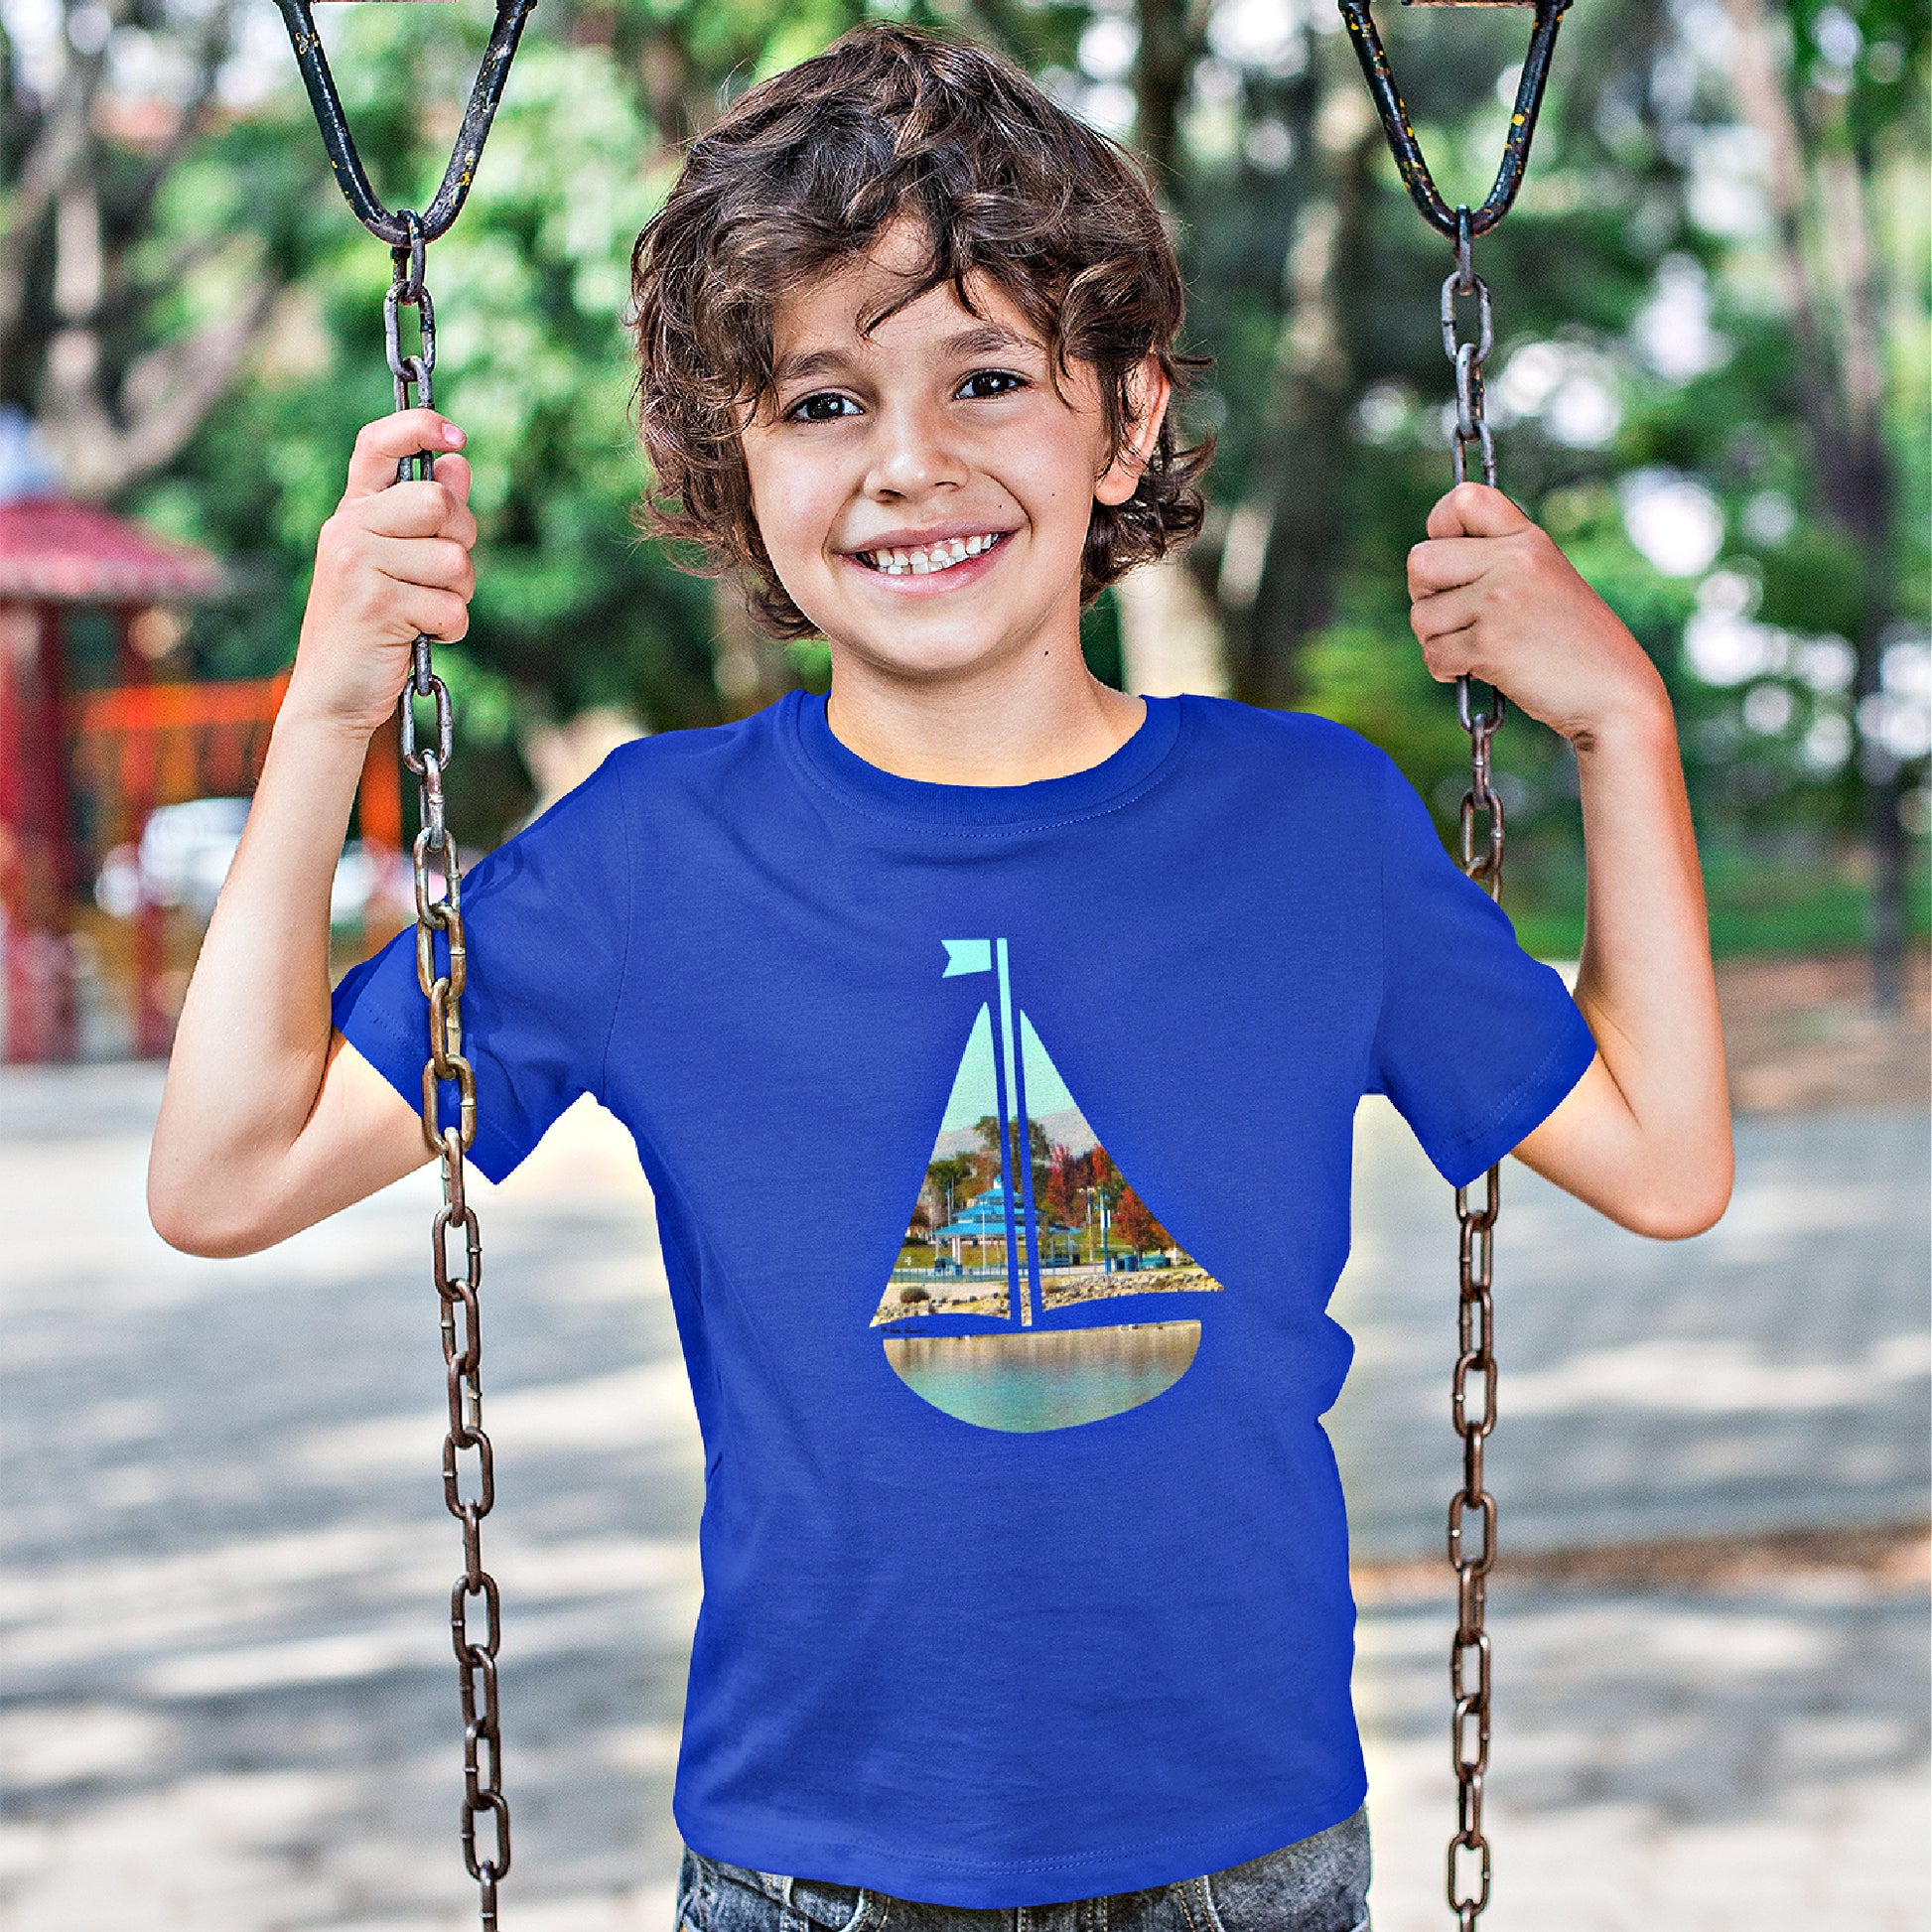 Mock up of a boy wearing our royal blue t-shirt